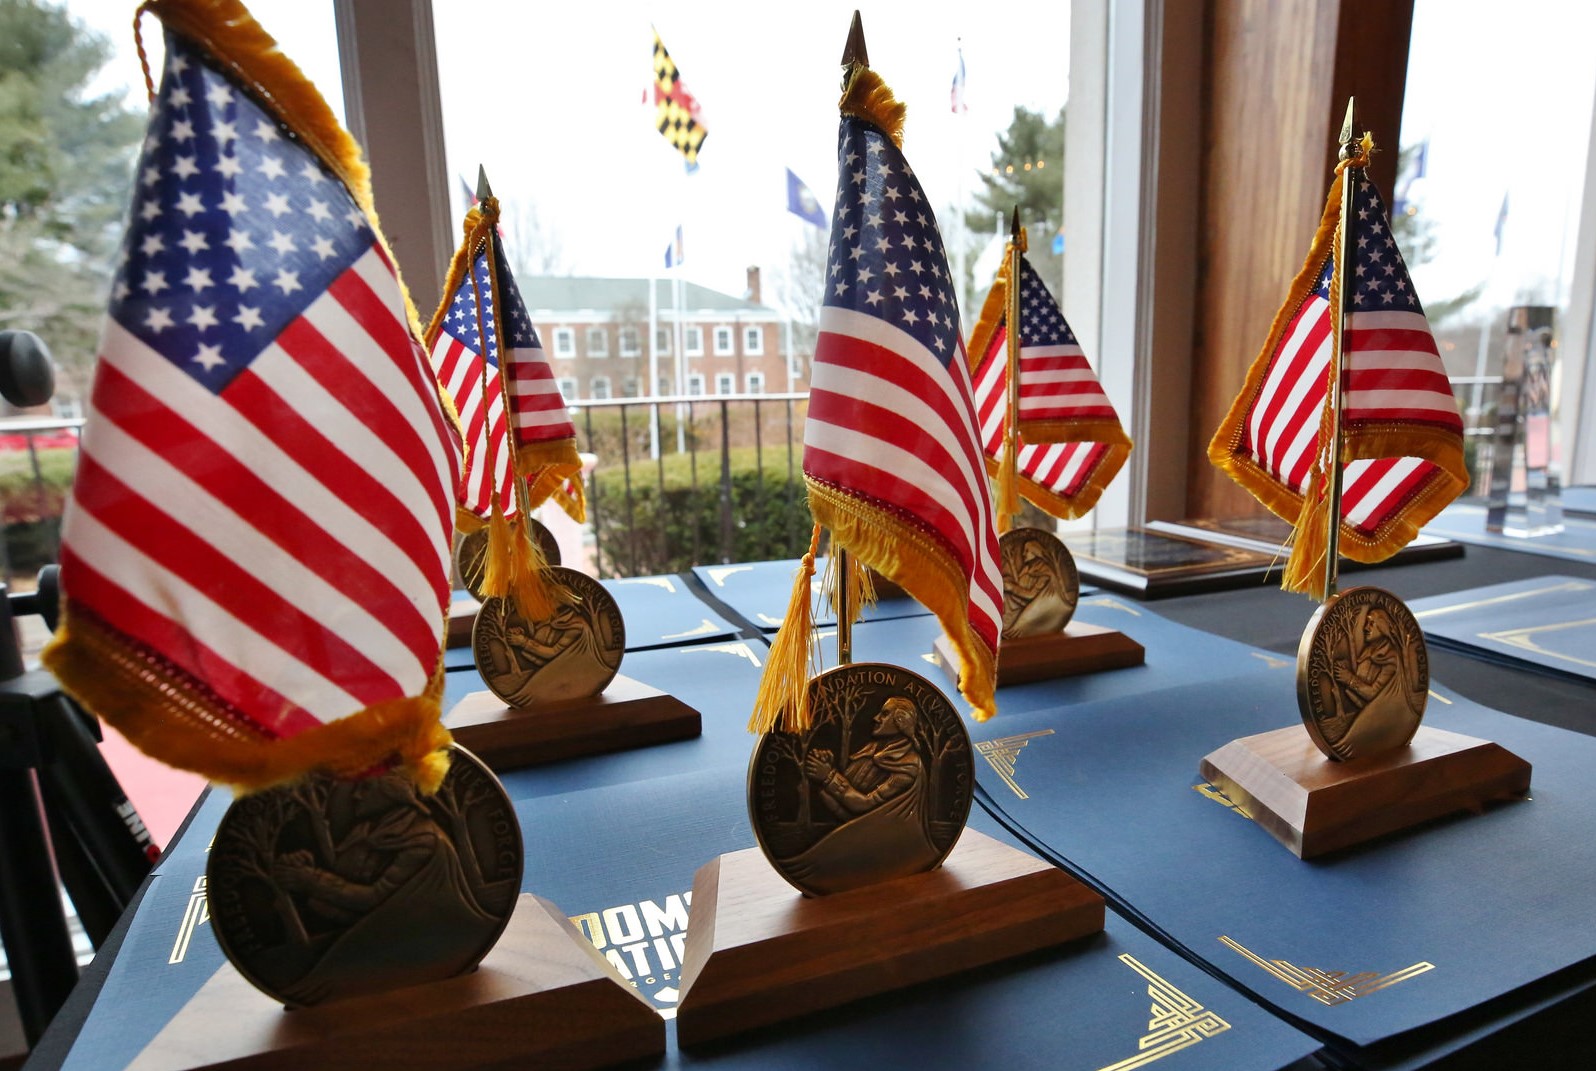 George Washington Medal awards displayed on a table with American flags